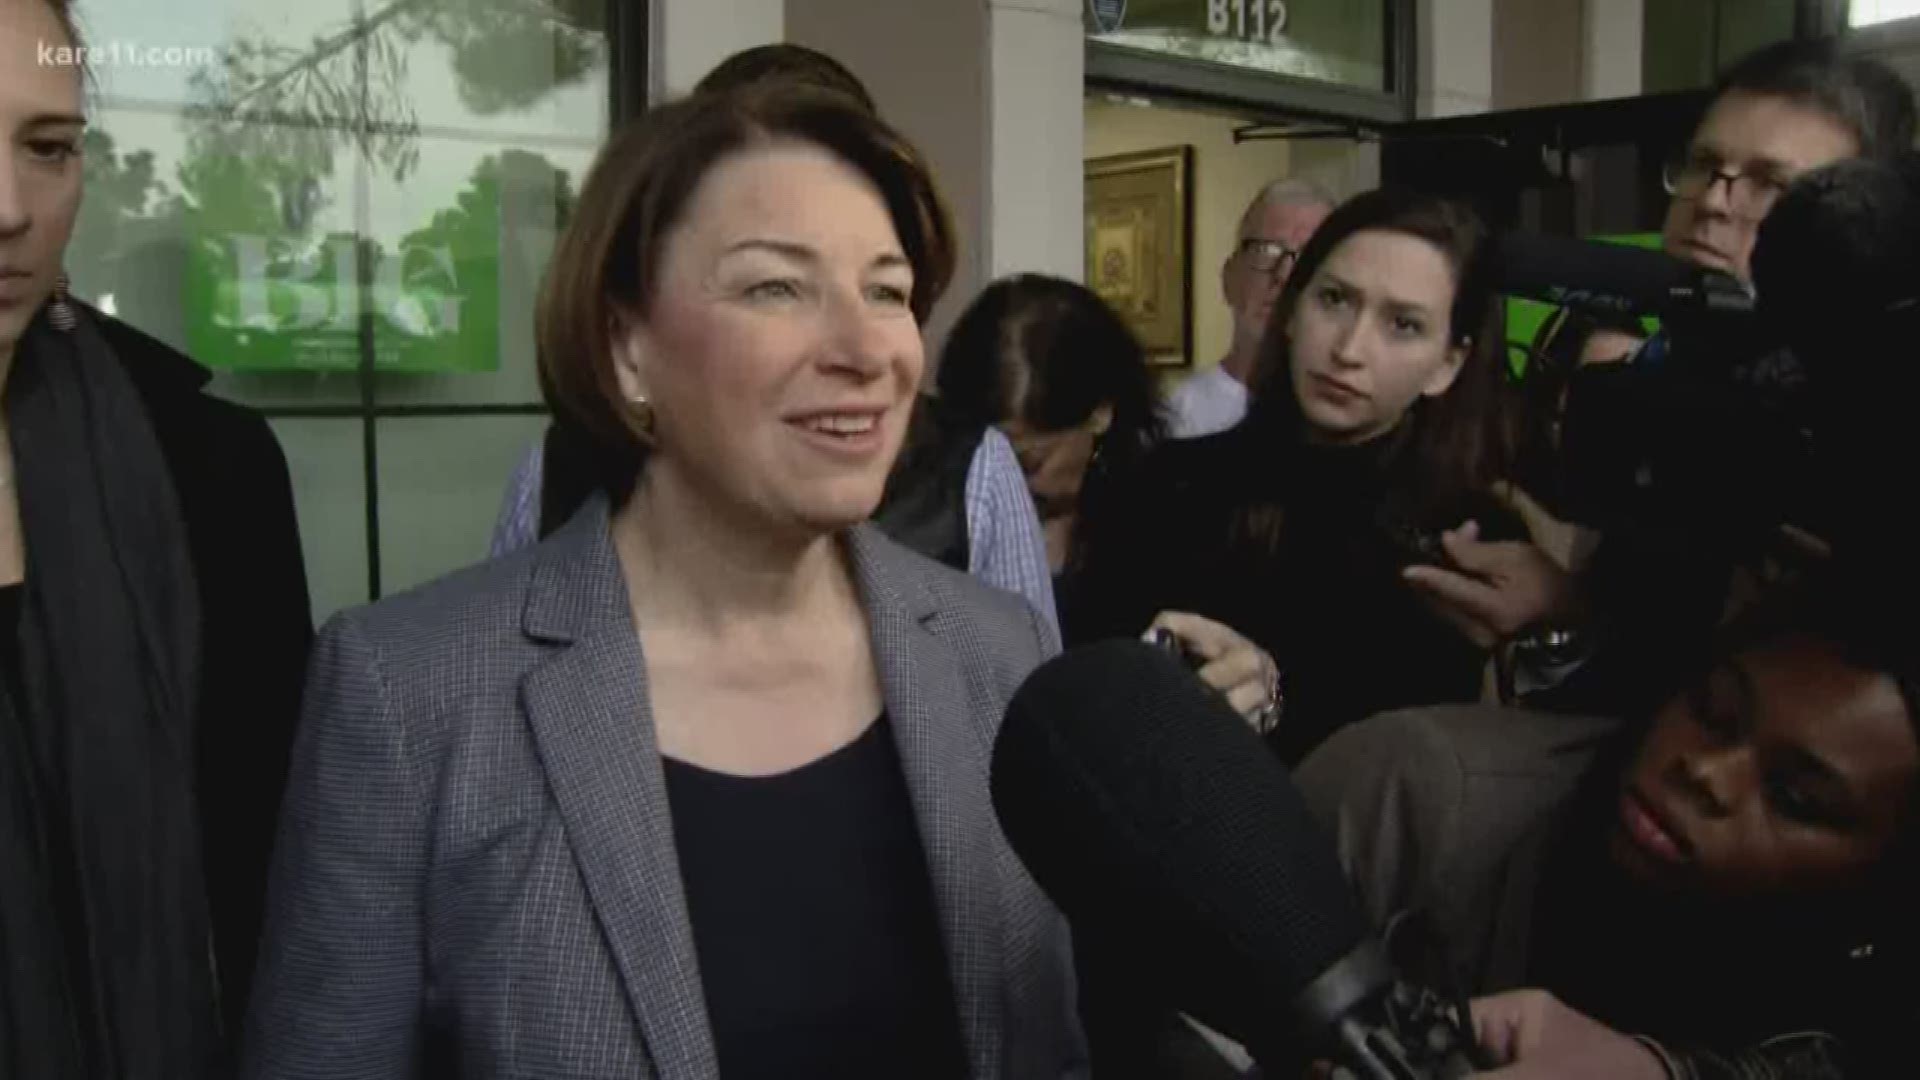 Amy Klobuchar seems to be heading toward a disappointing night in Nevada, but has vowed to fight on in the Democratic Presidential Primary.